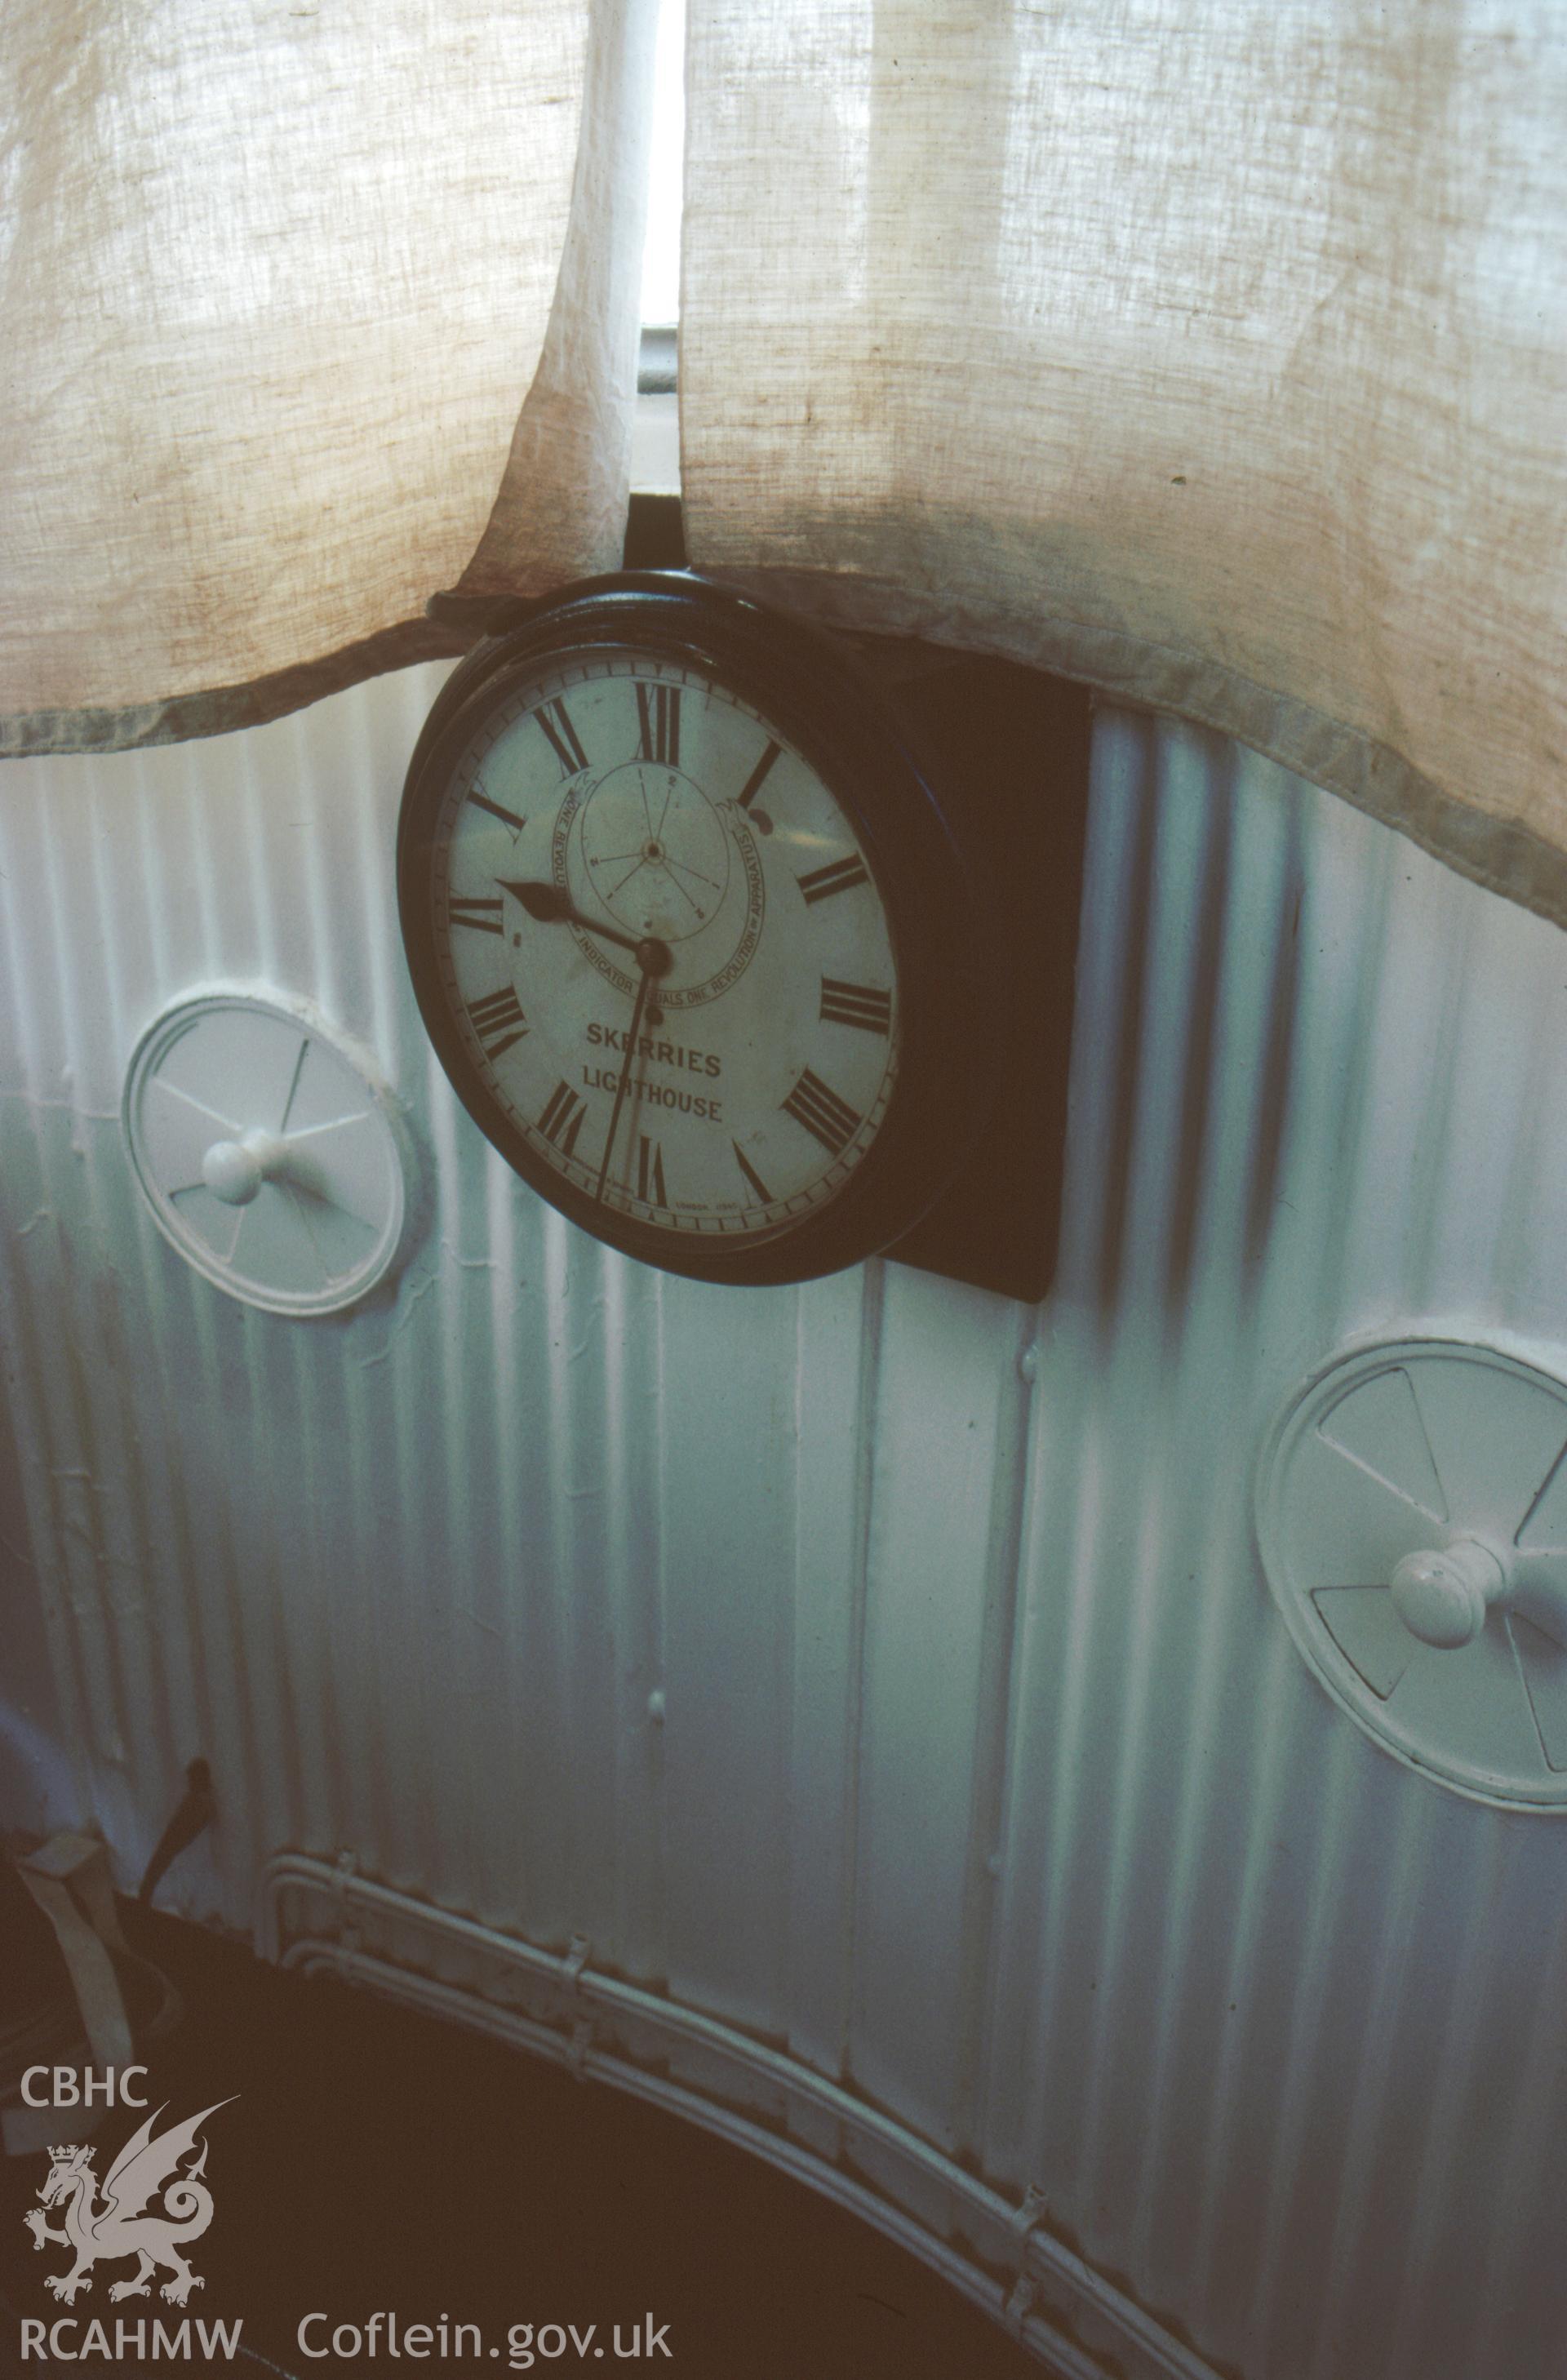 Colour slide, interior view showing lantern clock in the lighthouse.